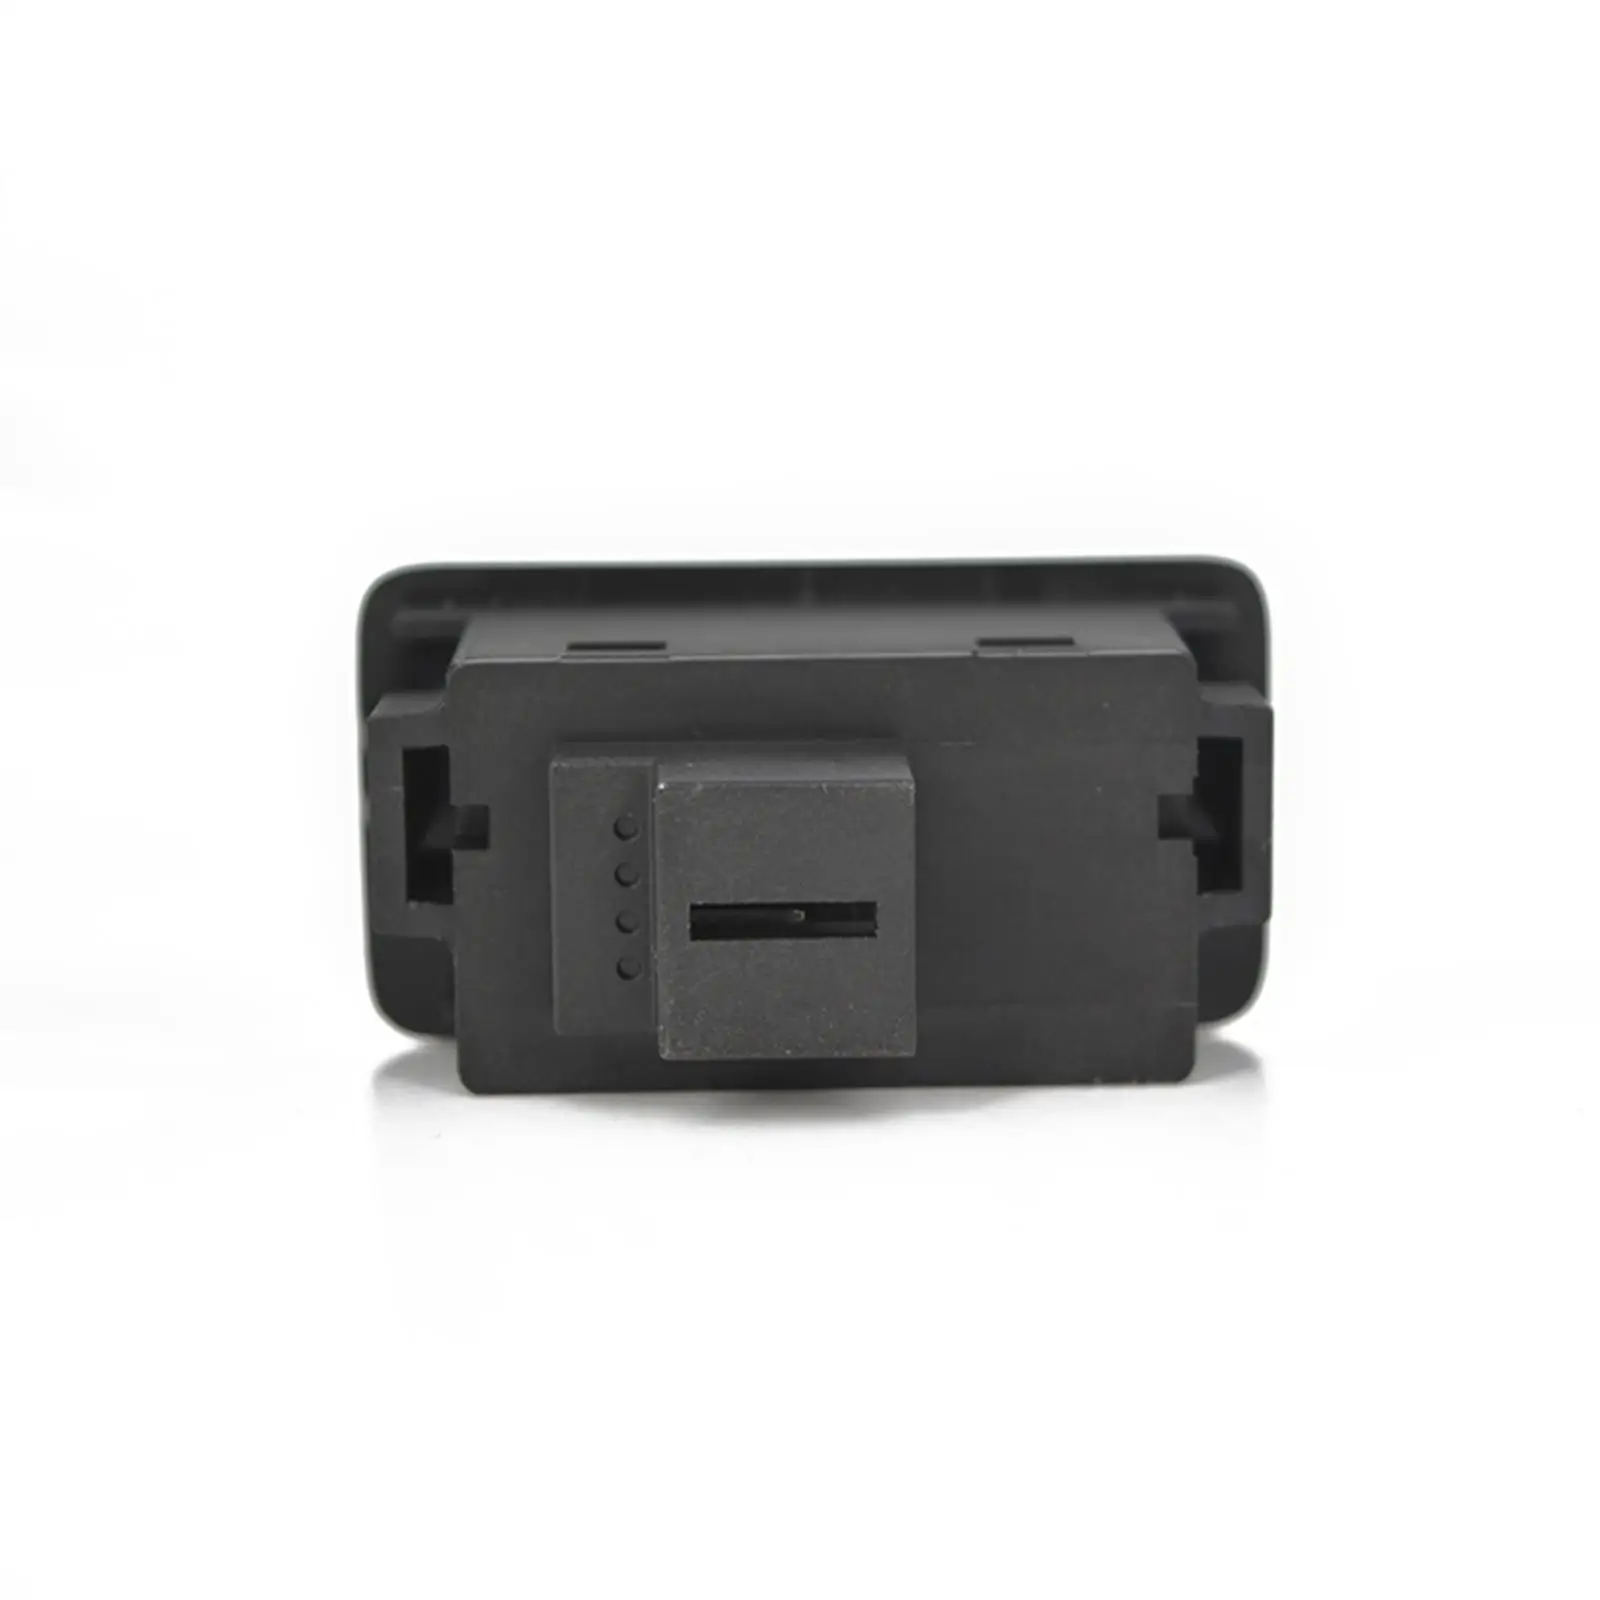 Tailgate Release Switch High Strength for Audi A6 Accessories Repair